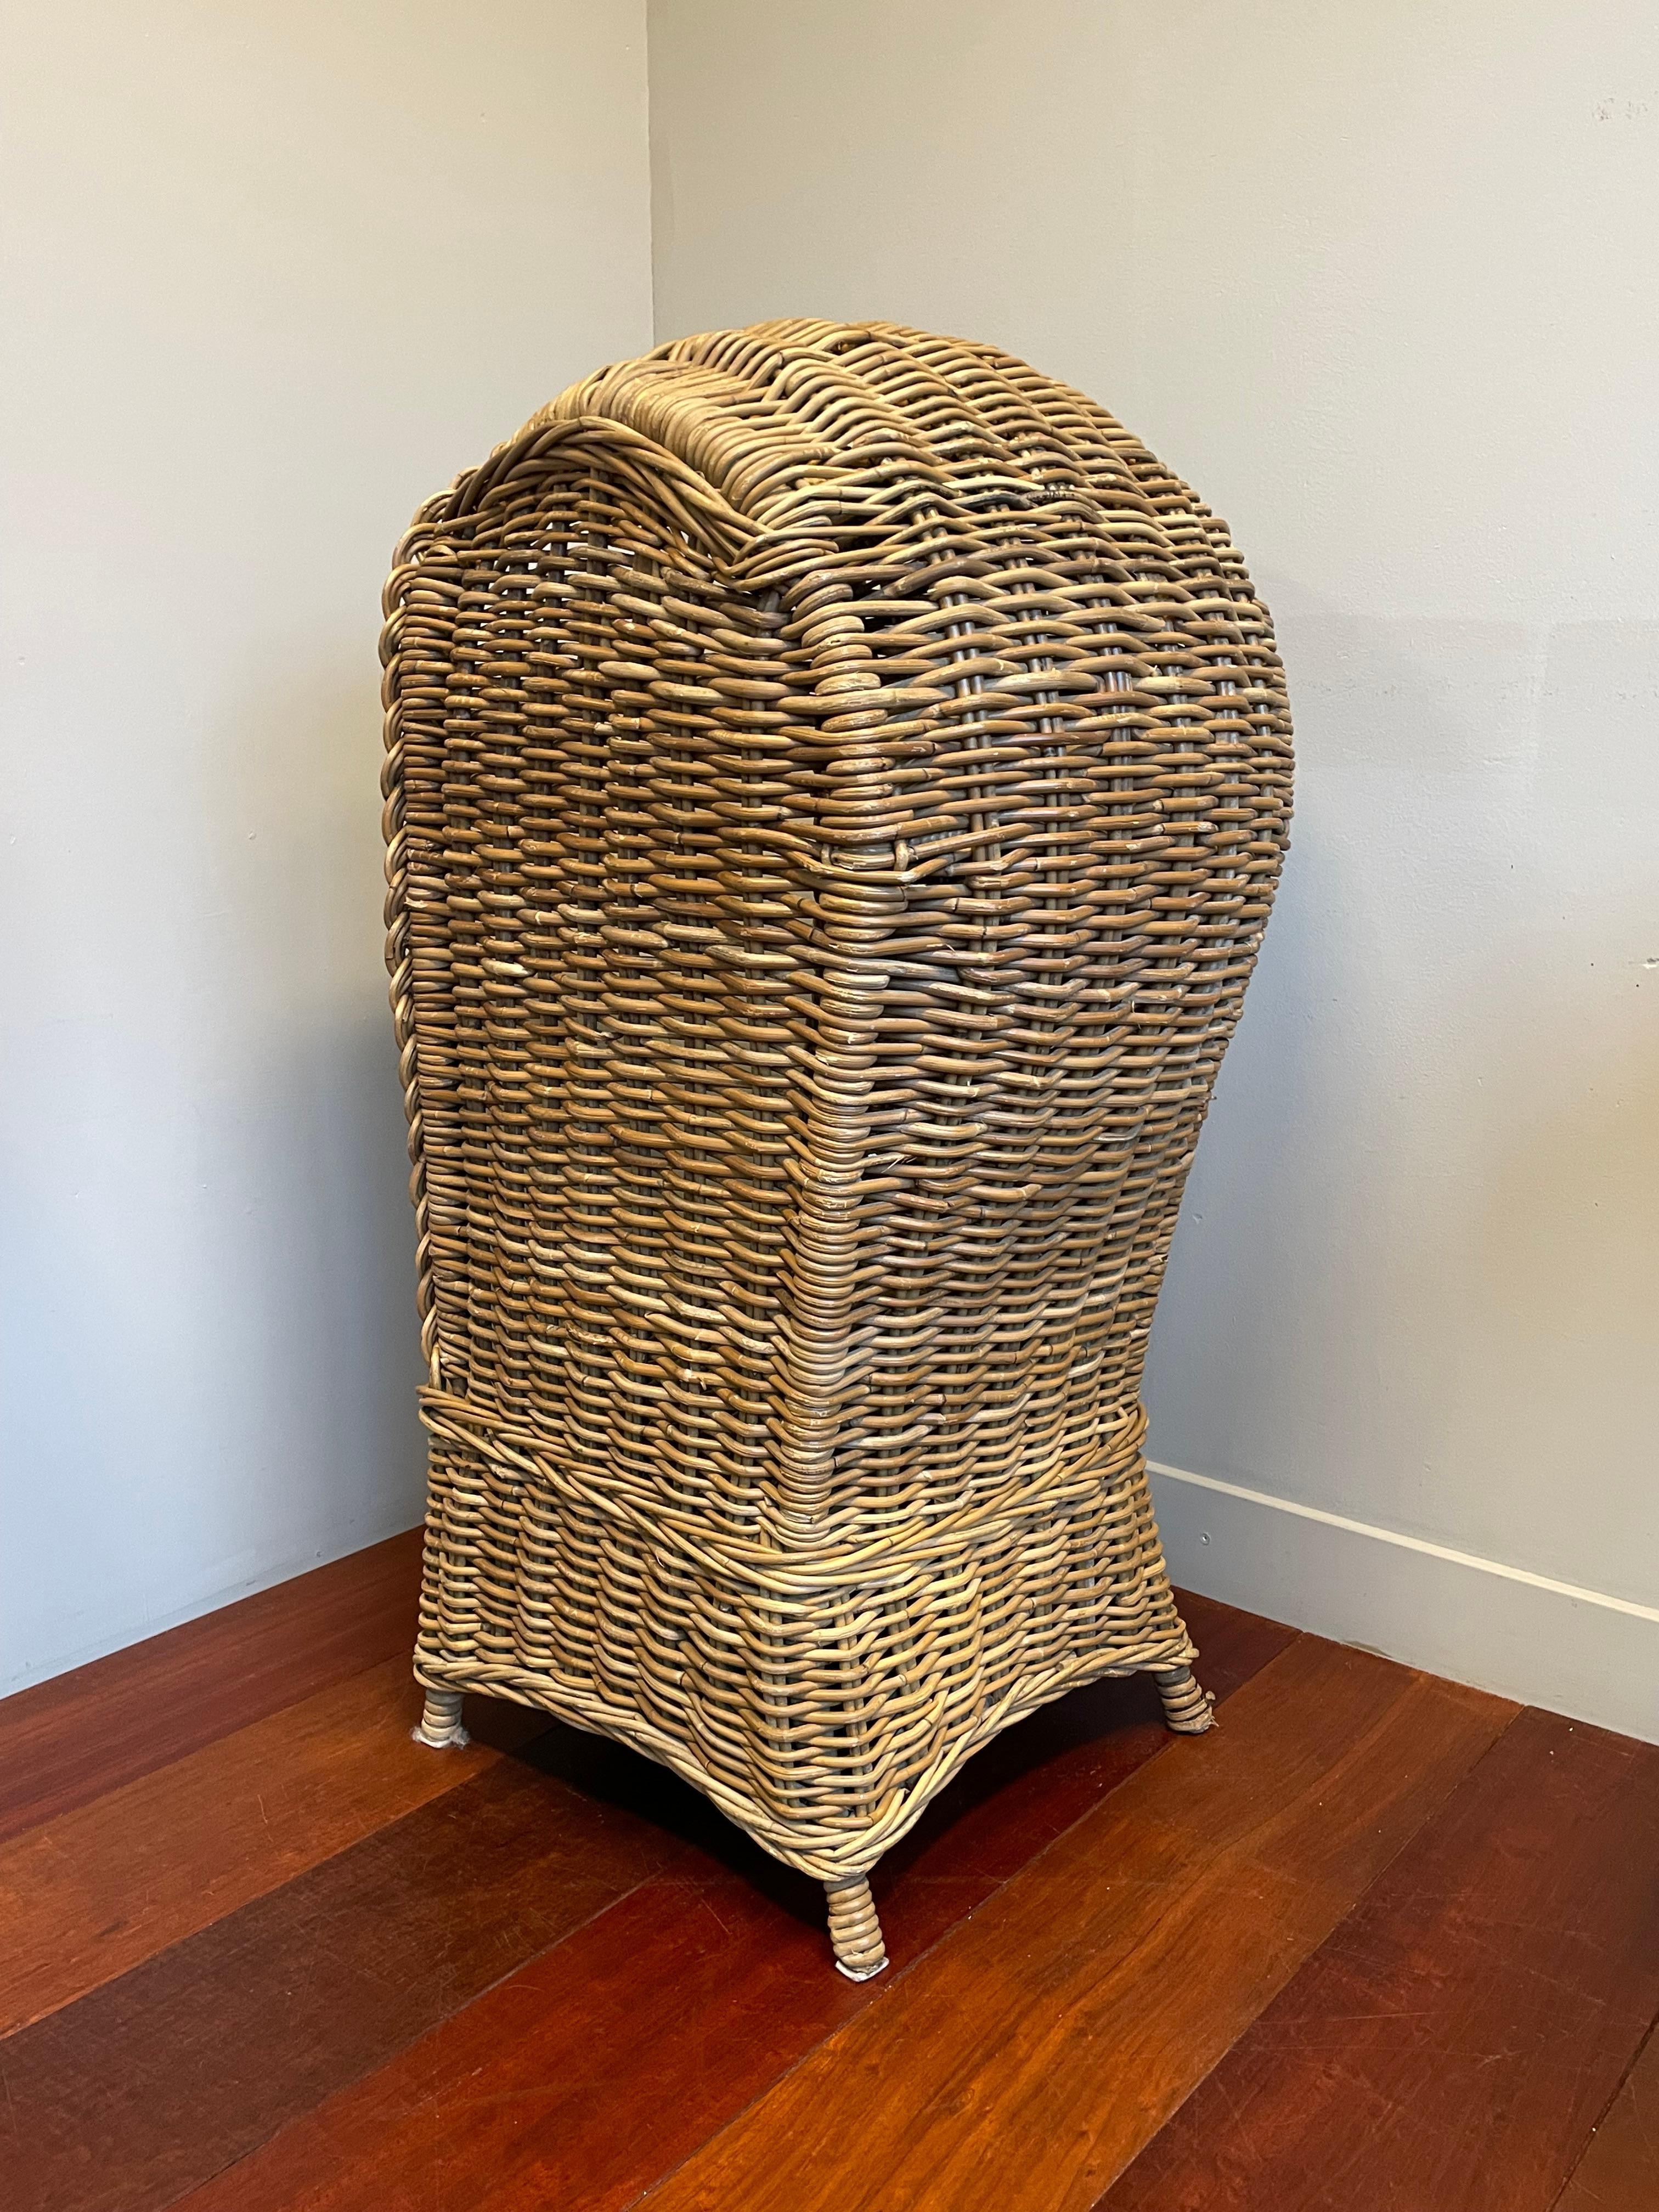 Very Rare & Super Decorative Antique-Like Hand Woven Rattan Beach Chair for Kids For Sale 3